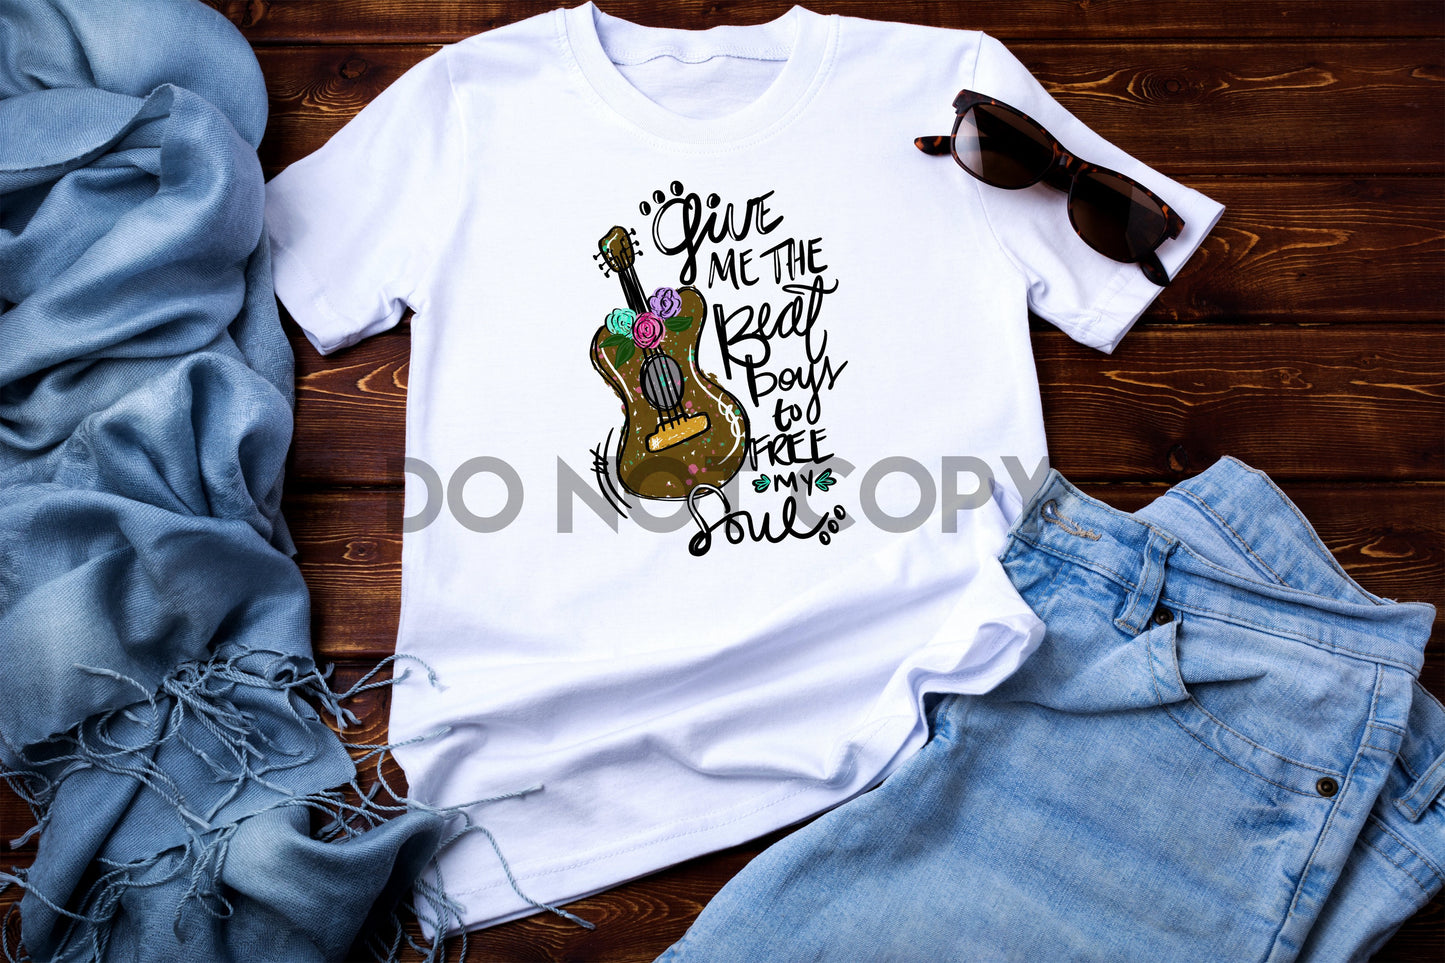 Give Me the Beat Boys and Free my Soul Sublimation print